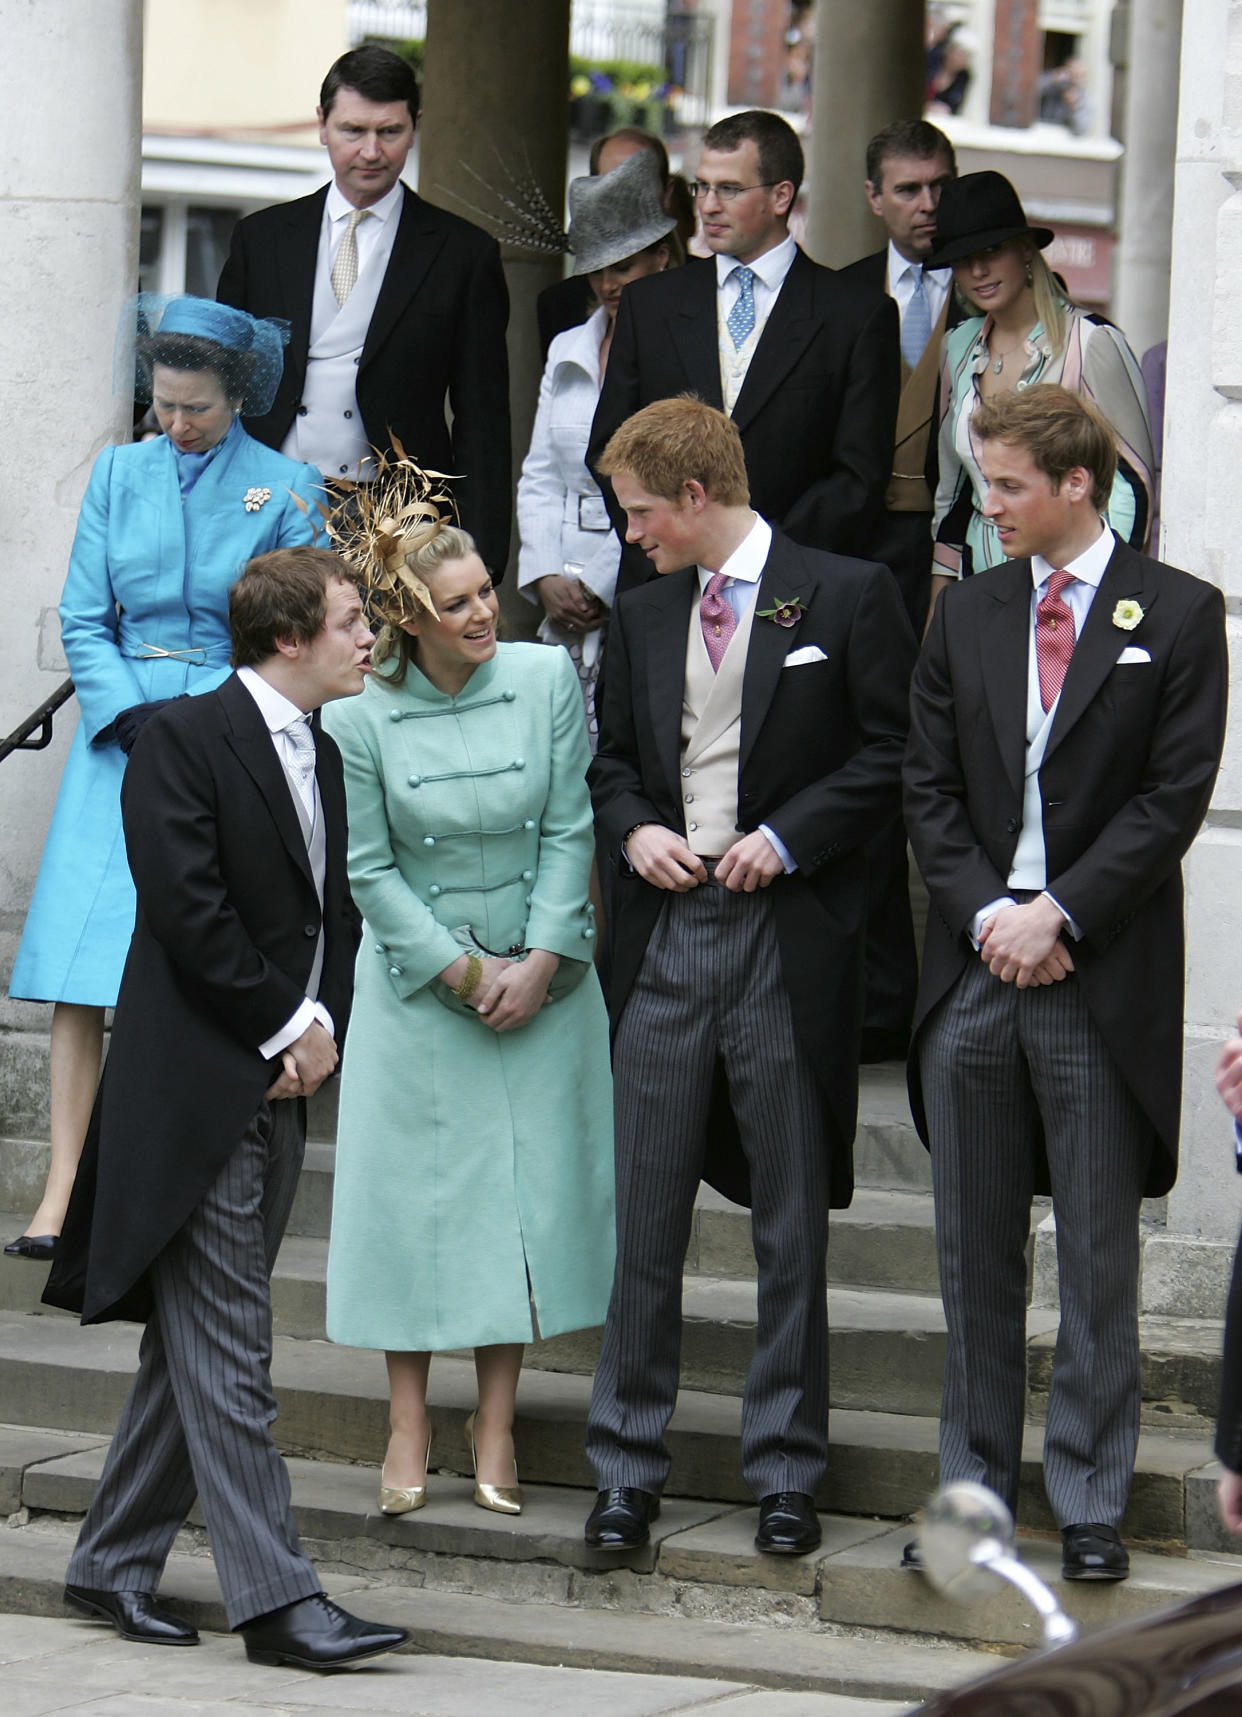 Laura and brother Tom, with Prince William and Harry at the wedding of their father, Prince Charles, to Laura’s mother, Camilla Parker Bowles. (Photo: Getty Images)